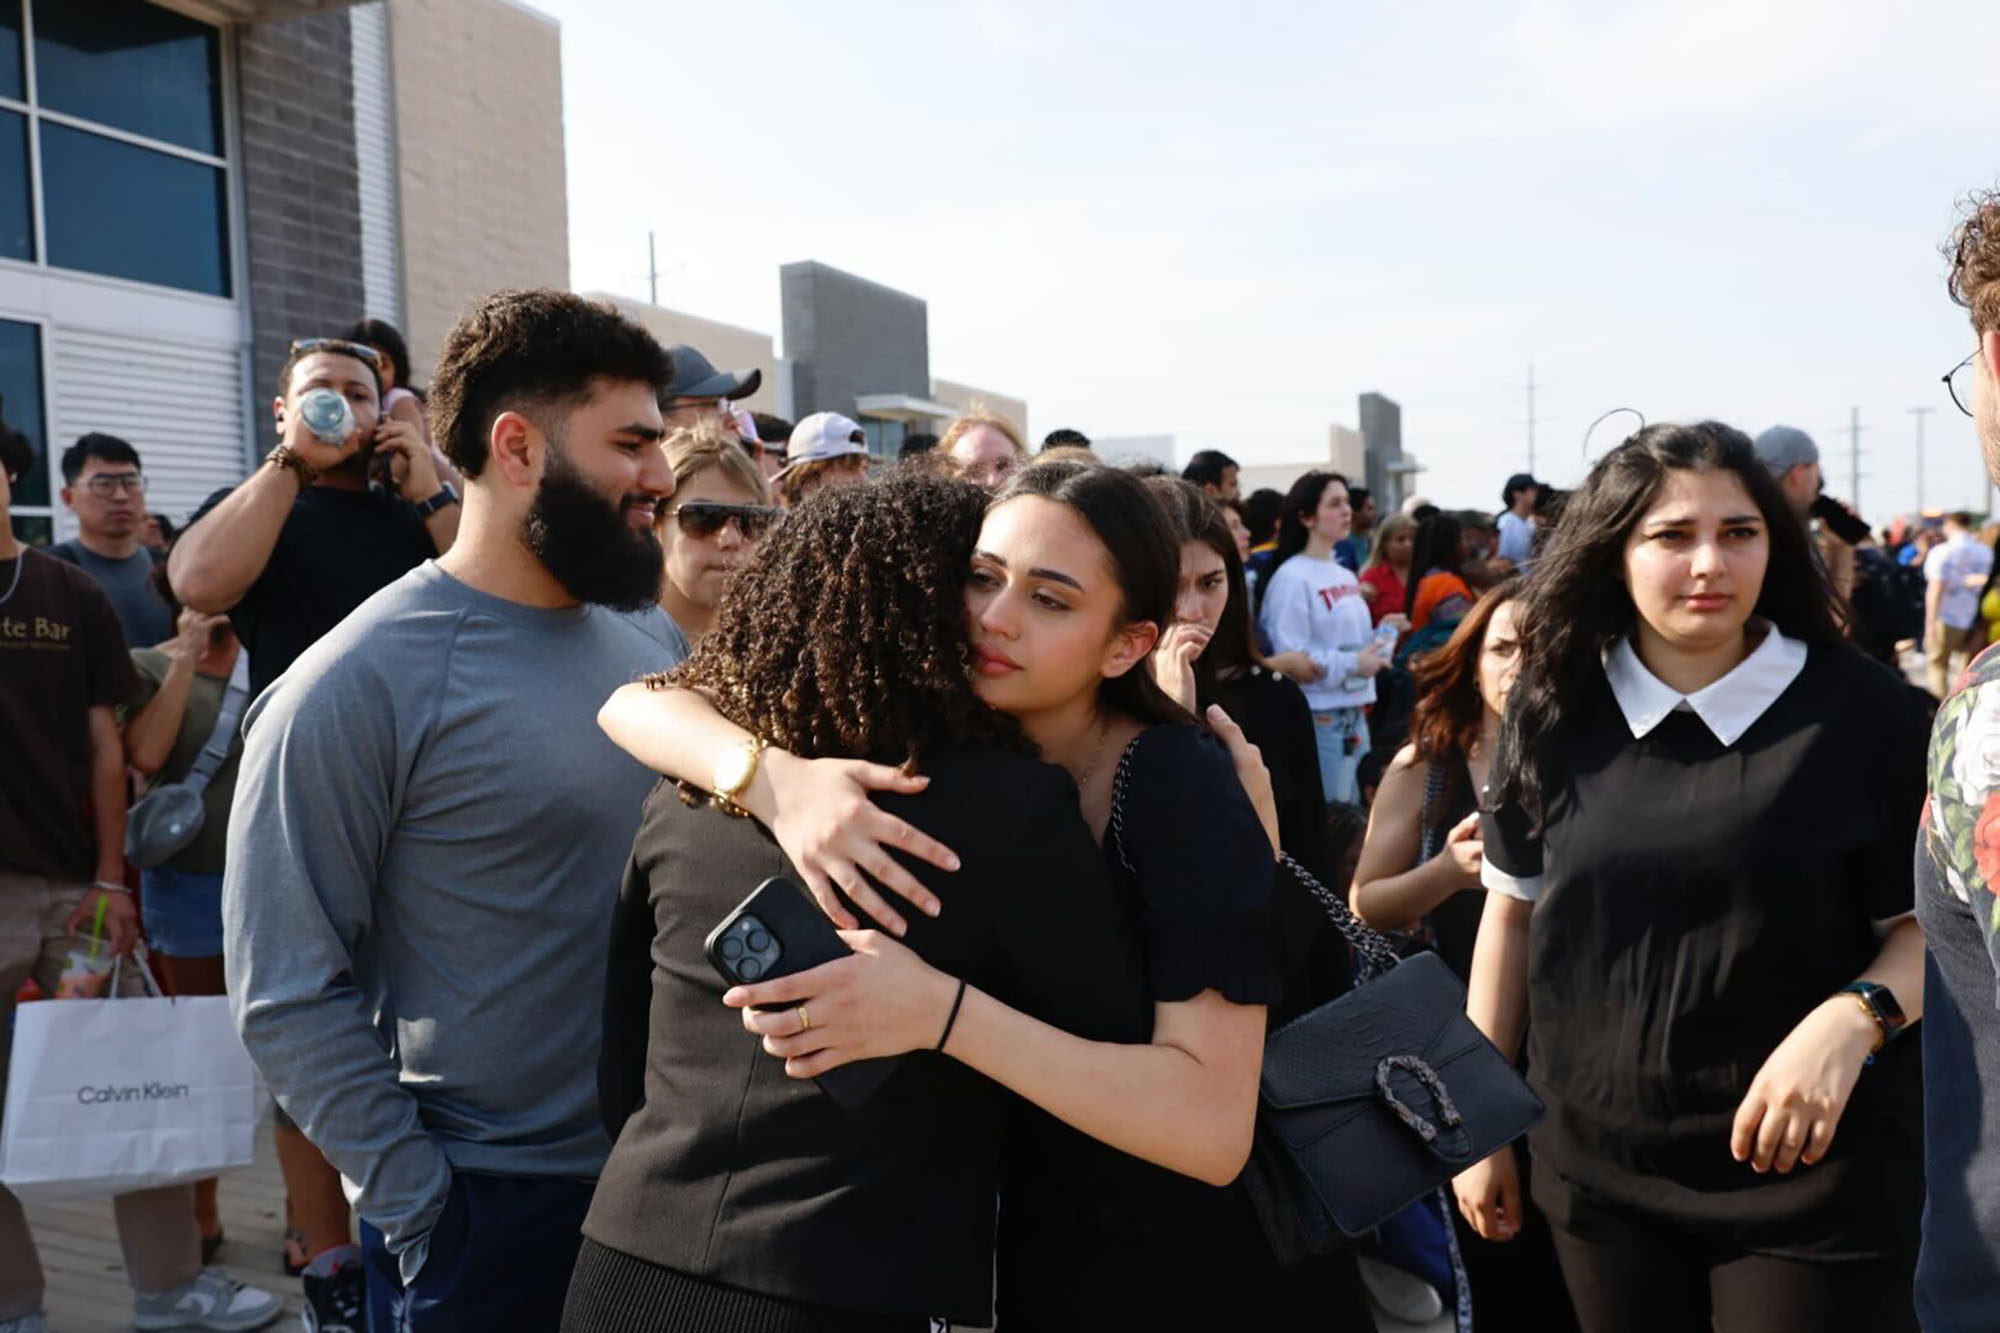 People embrace outside the Allen Premium Outlets, where authorities responded to reports of an active shooter on Saturday, May 6, 2023, in Allen, Texas. Photo: TNS